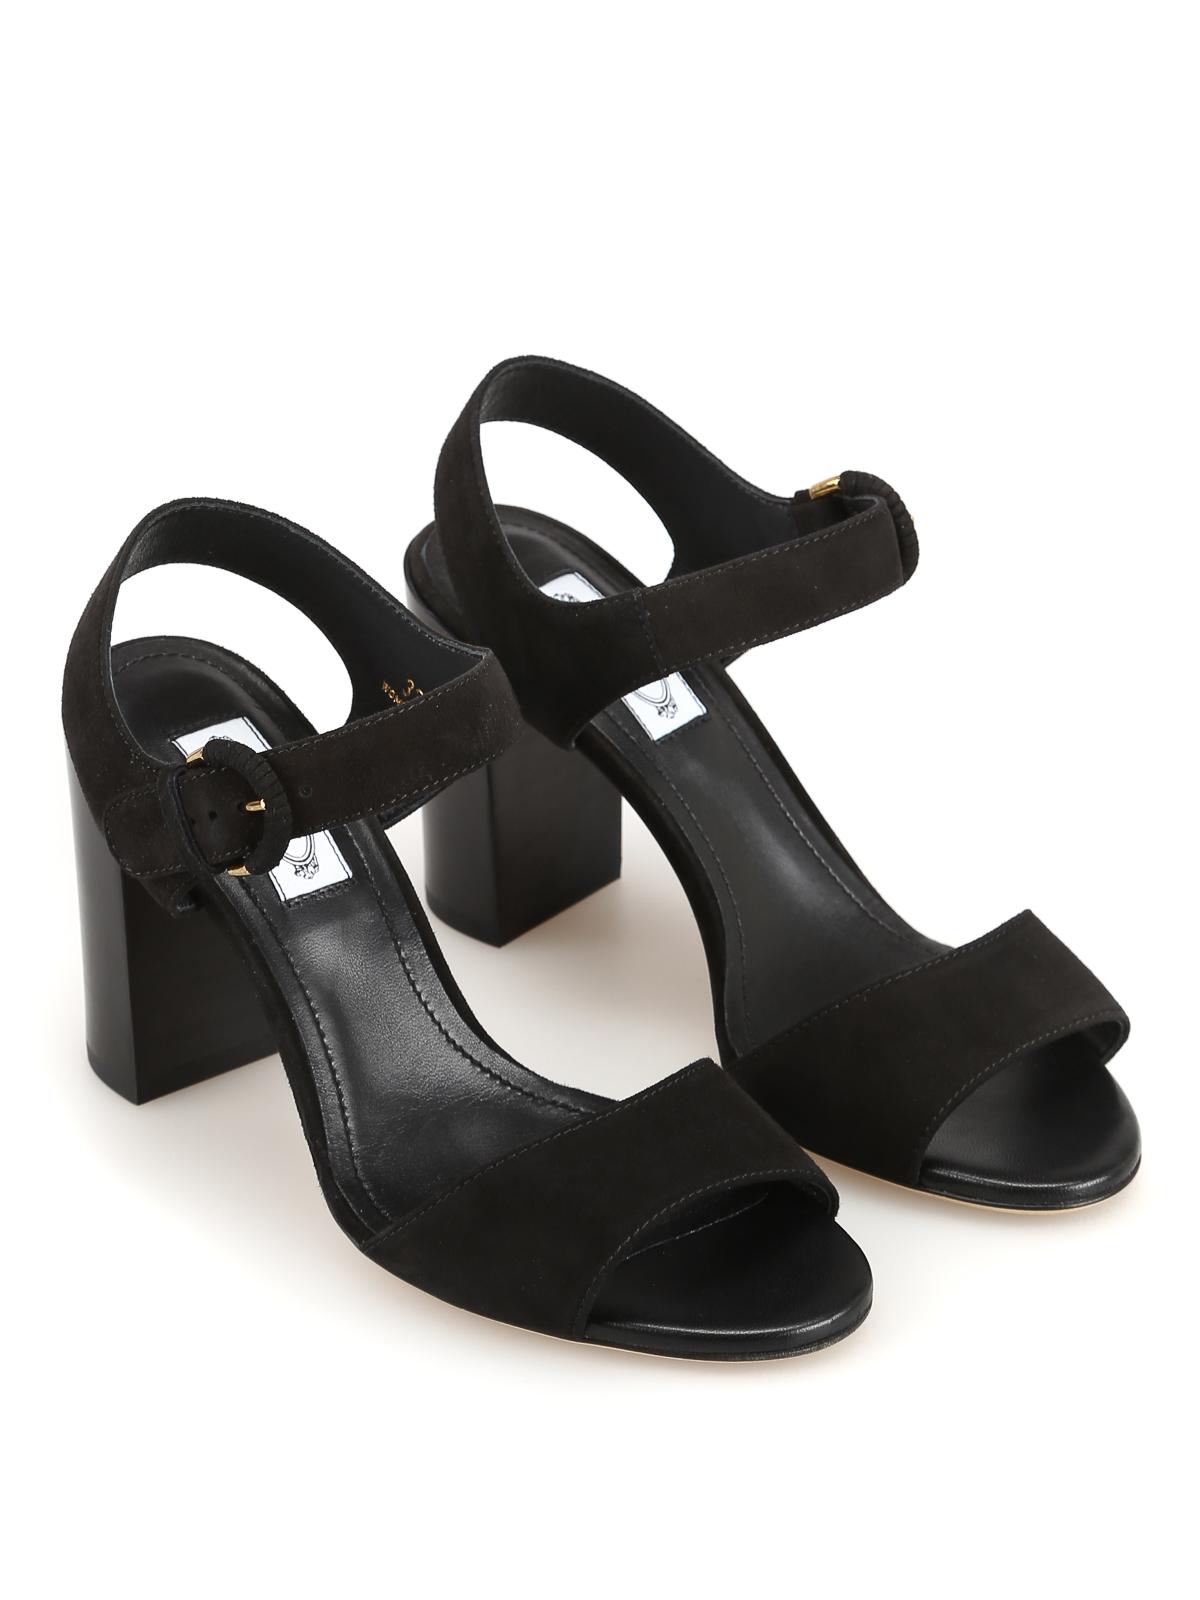 Tod's Women's Heeled Sandals in Black - Save 21% - Lyst